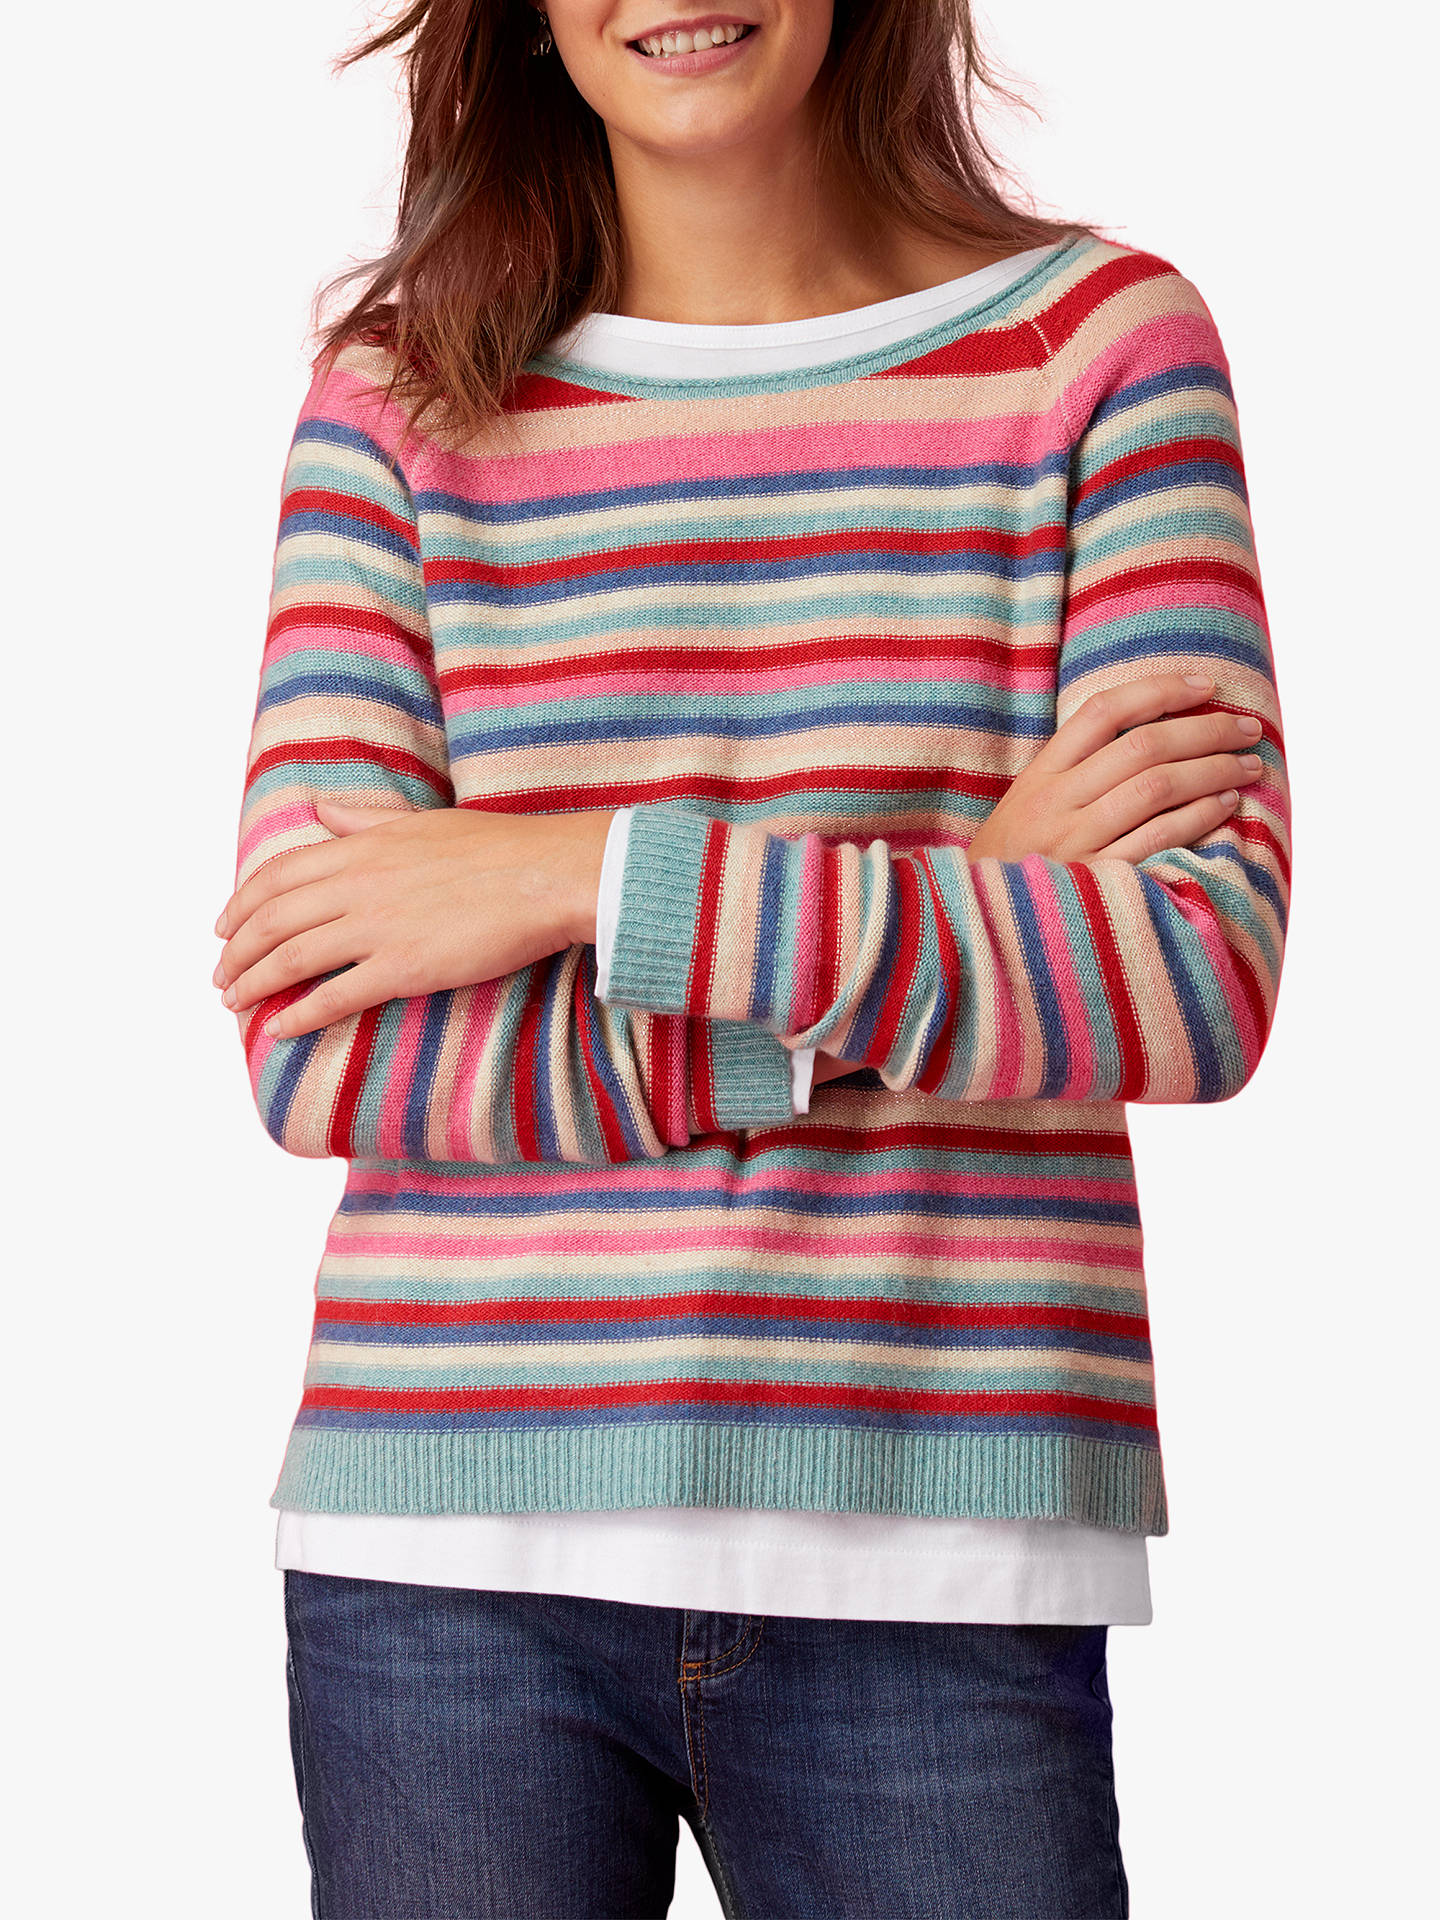 White Stuff Candy Stripe Jumper Multi At John Lewis And Partners